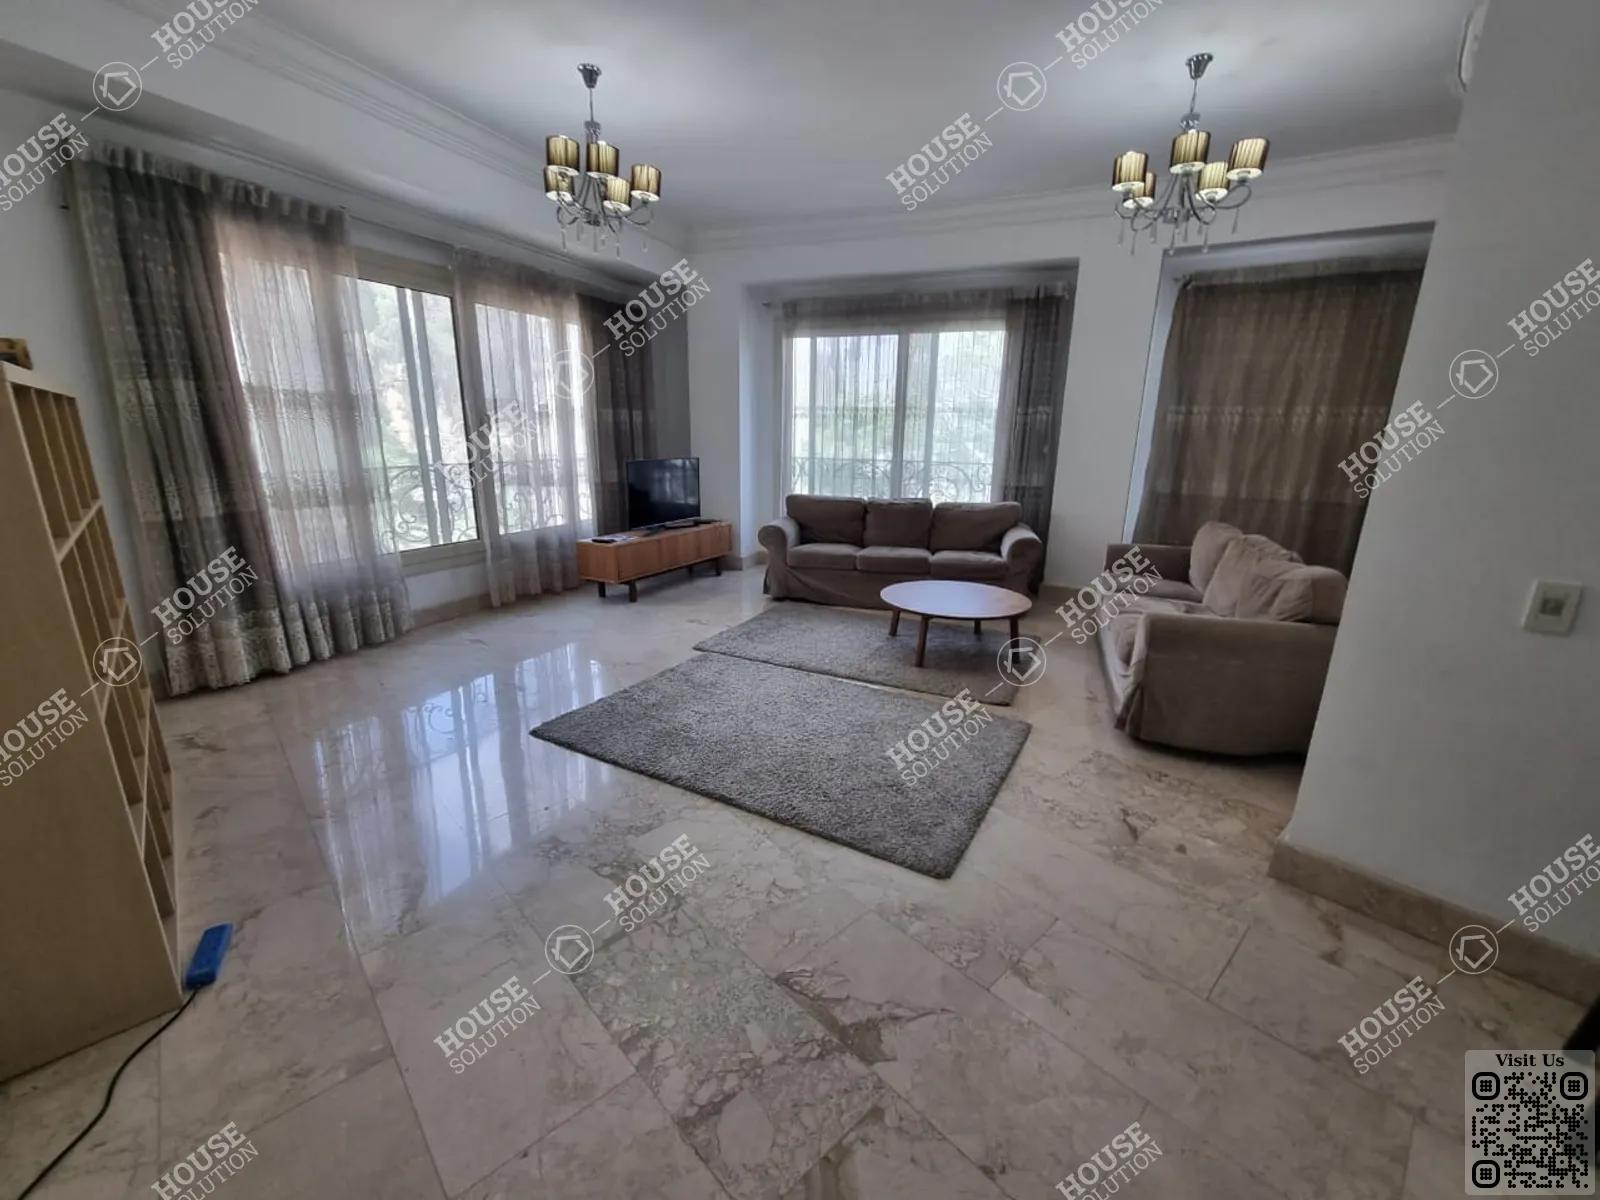 RECEPTION  @ Apartments For Rent In Maadi Maadi Sarayat Area: 120 m² consists of 2 Bedrooms 2 Bathrooms Furnished 5 stars #5660-0